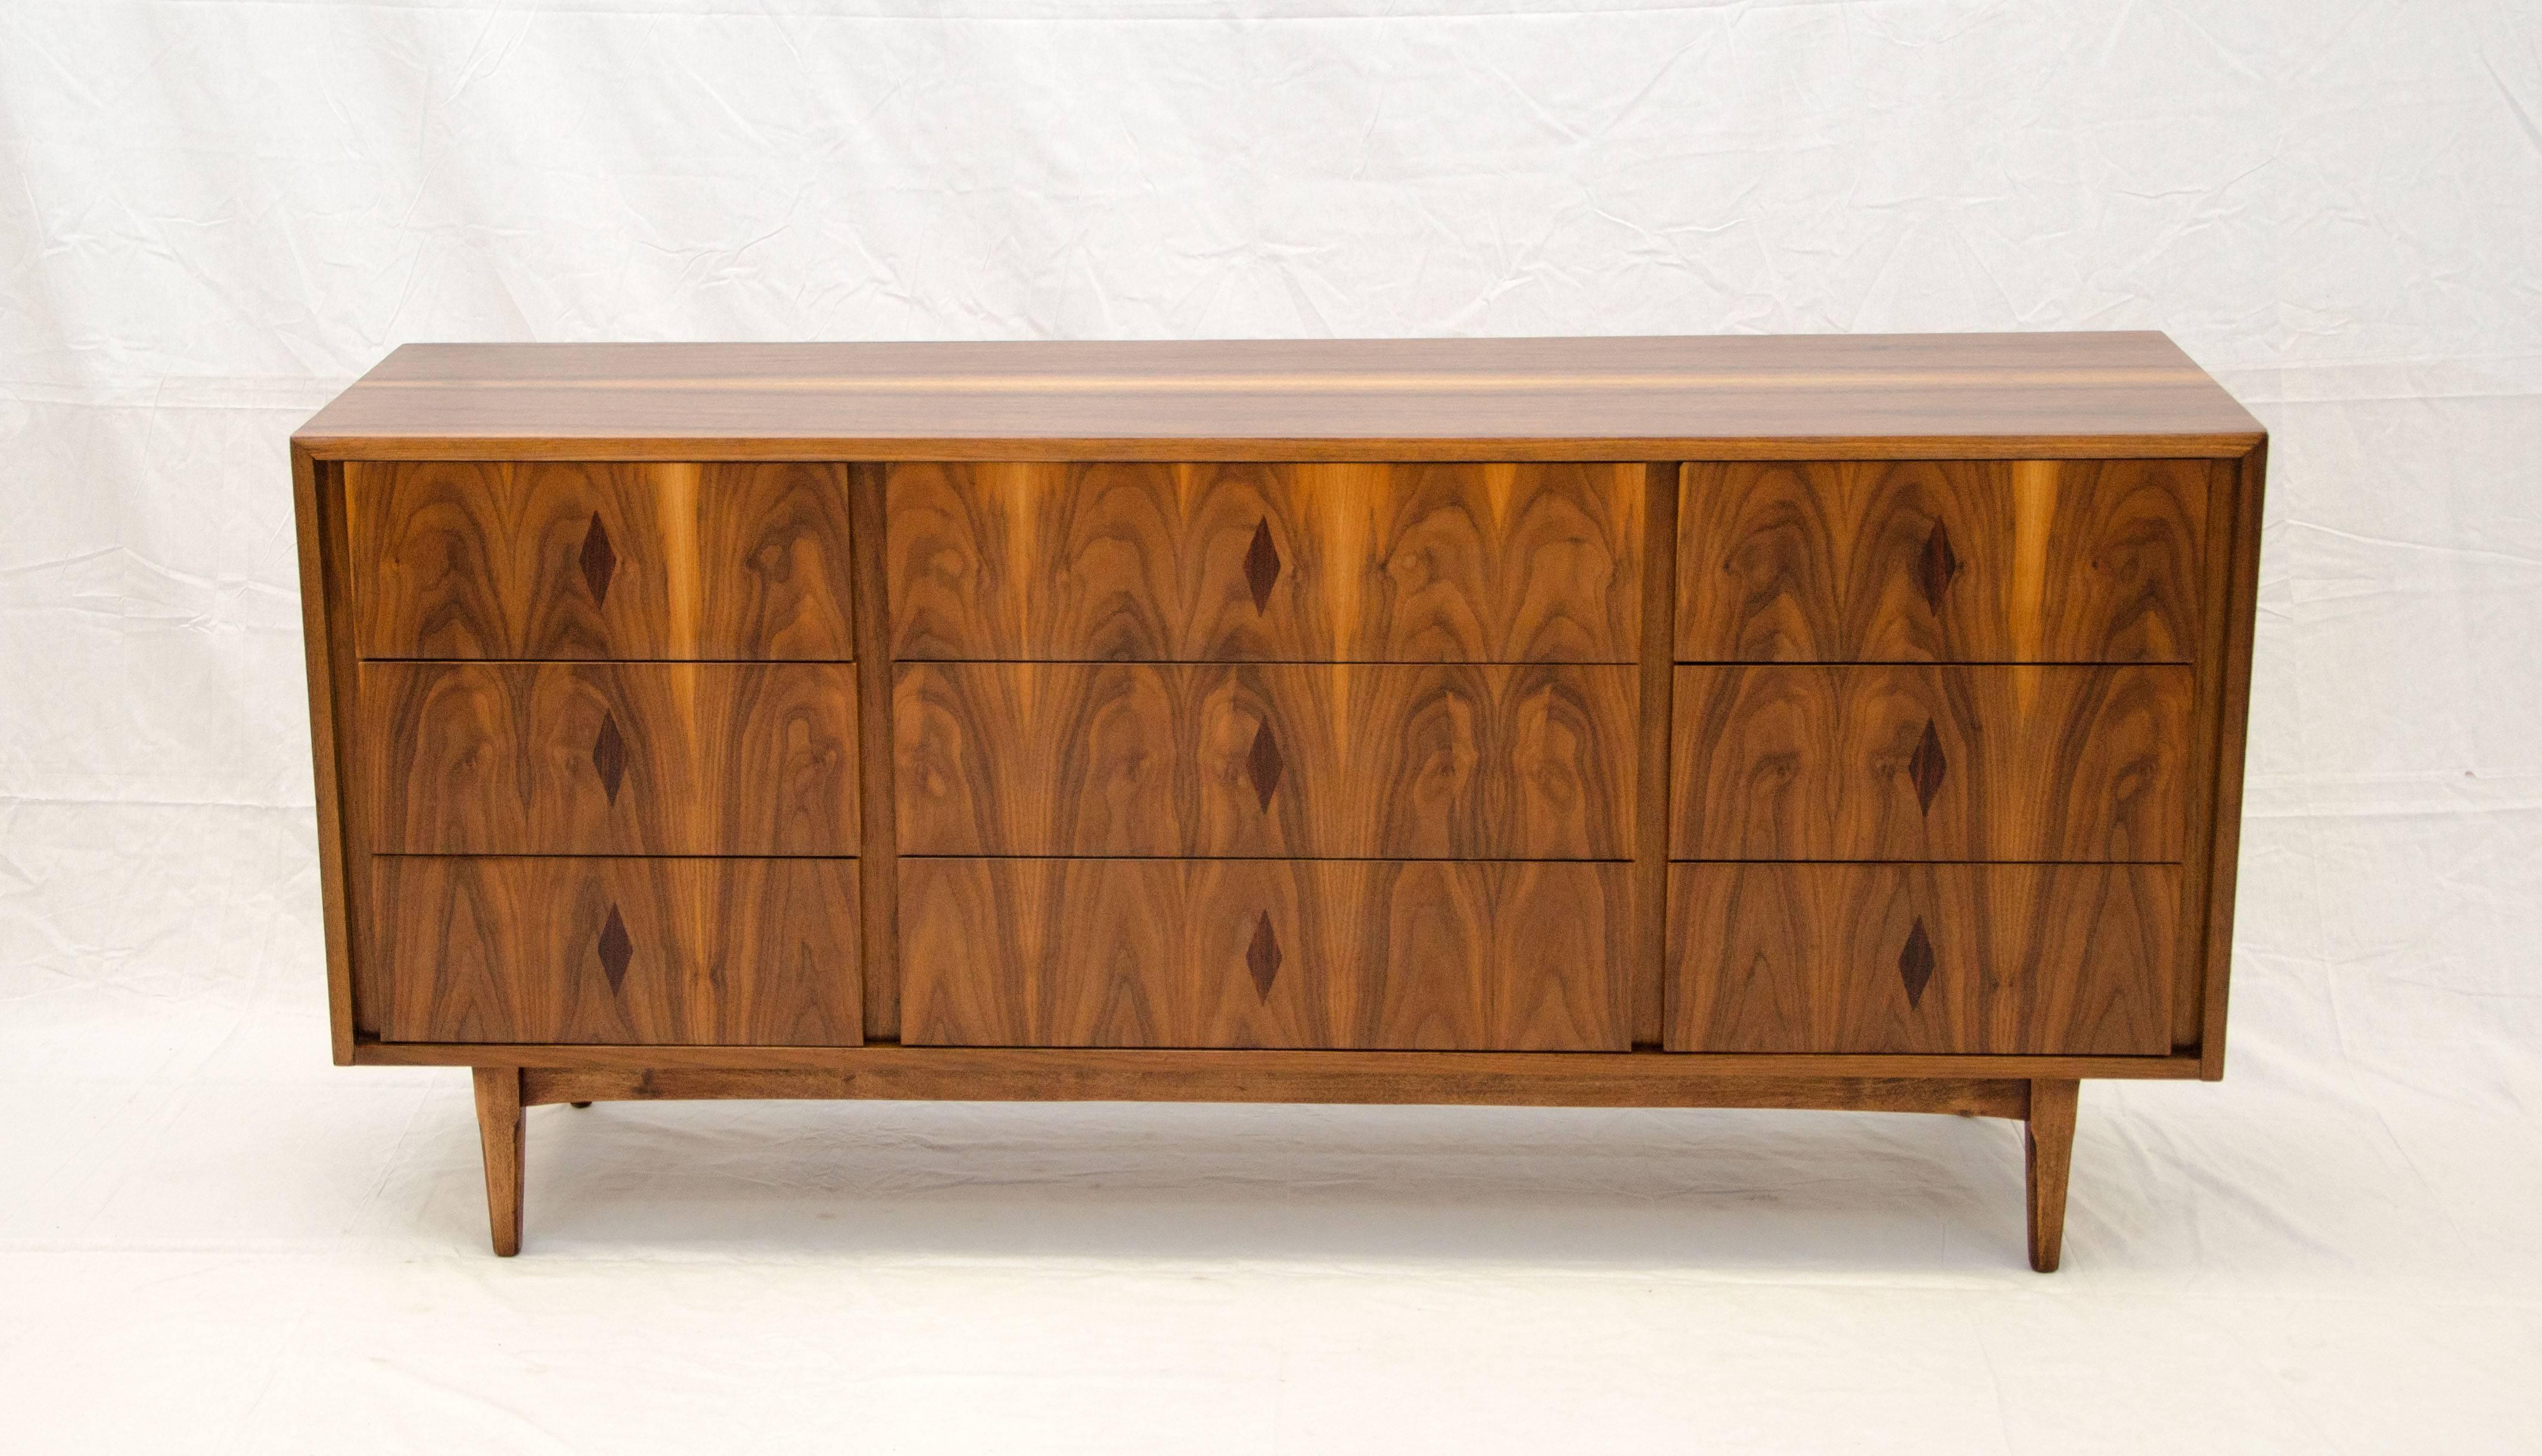 Very nice midcentury nine-drawer walnut dresser or chest with bookmatched grain patterns. There are diamond shaped rosewood inlays positioned in the center or each drawer. The dovetailed drawers have finger insets at the sides and open and close